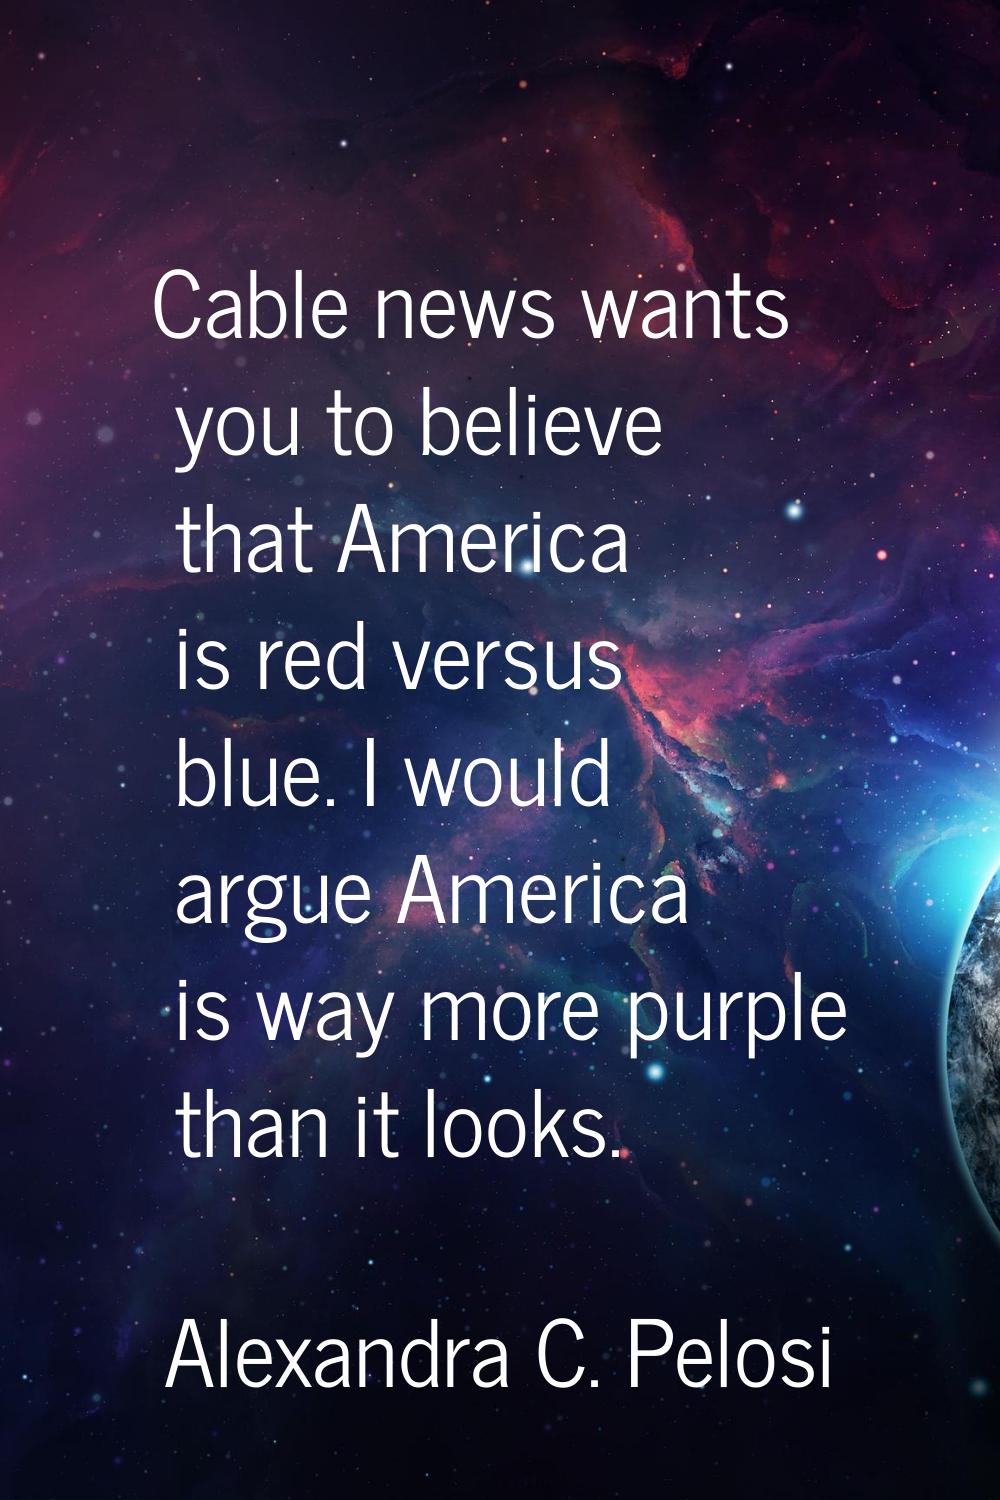 Cable news wants you to believe that America is red versus blue. I would argue America is way more 